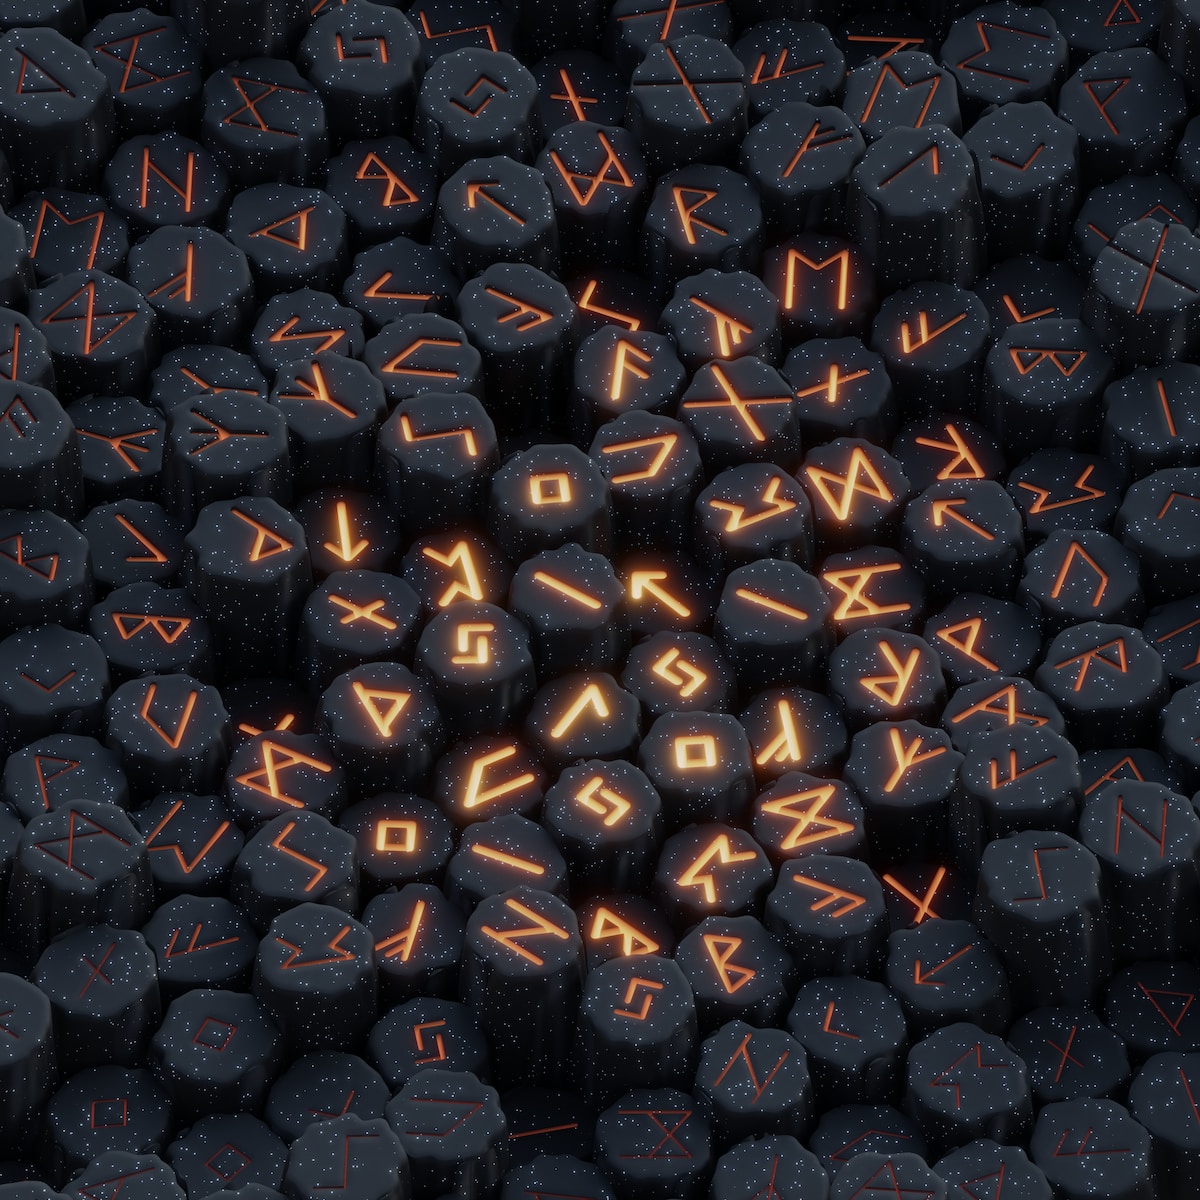 a pile of black rocks with orange letters on them